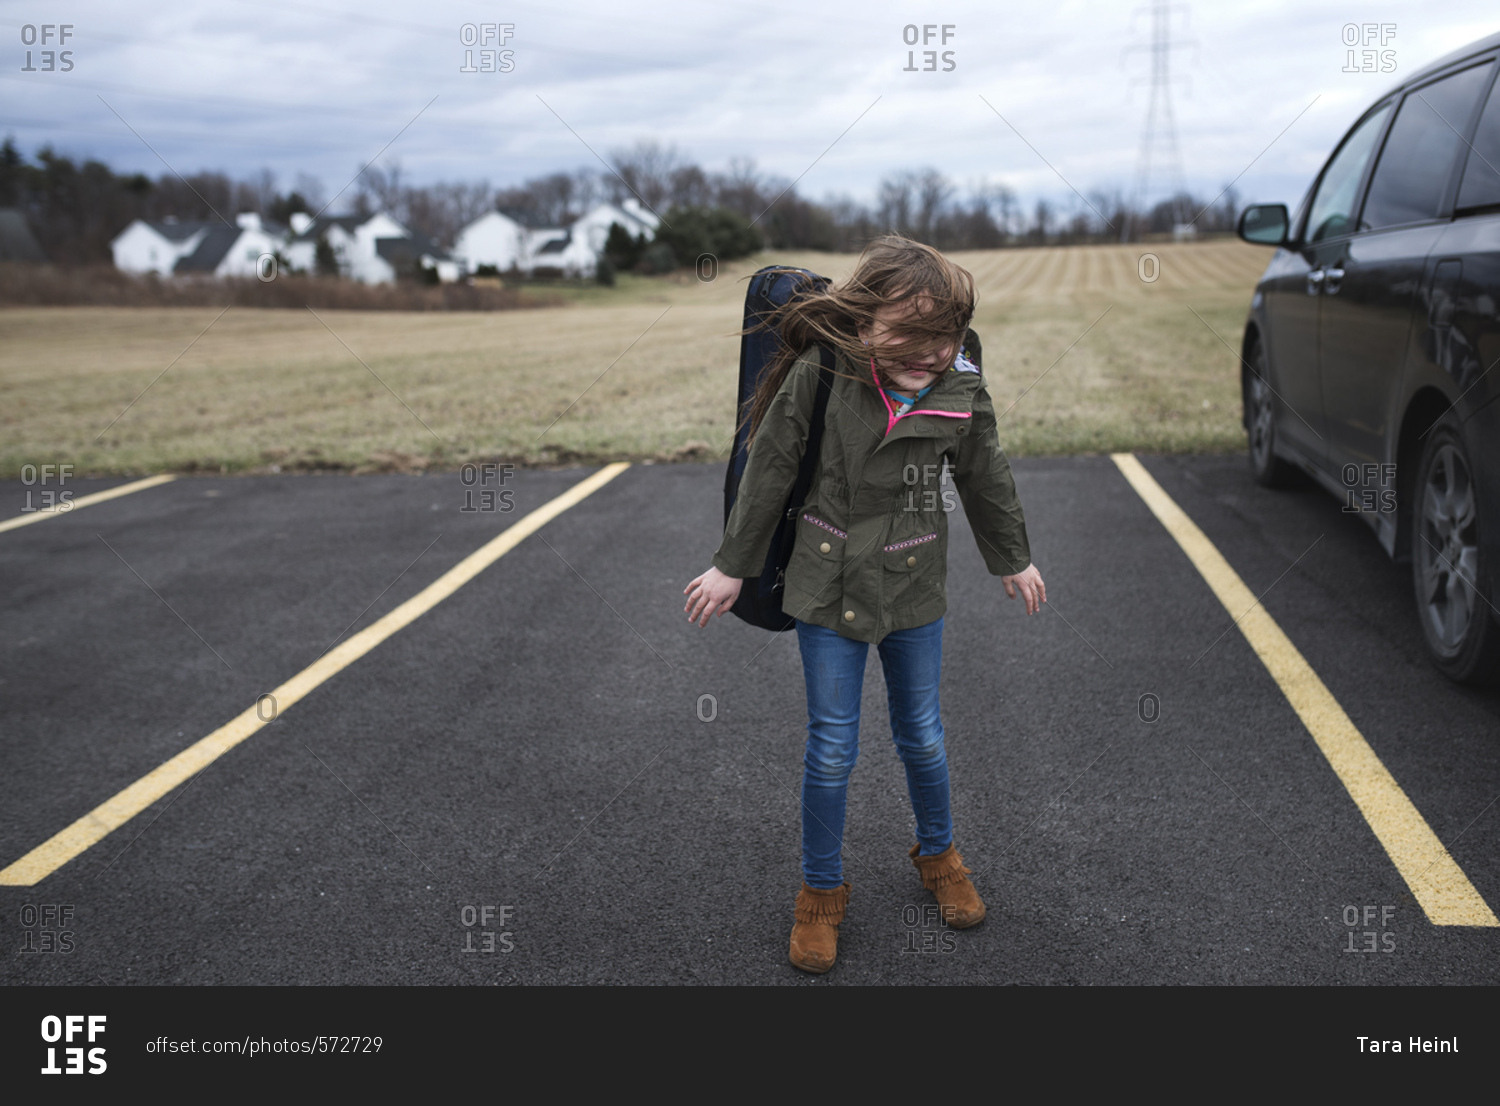 Little girl in a parking lot with her wind blowing in her face